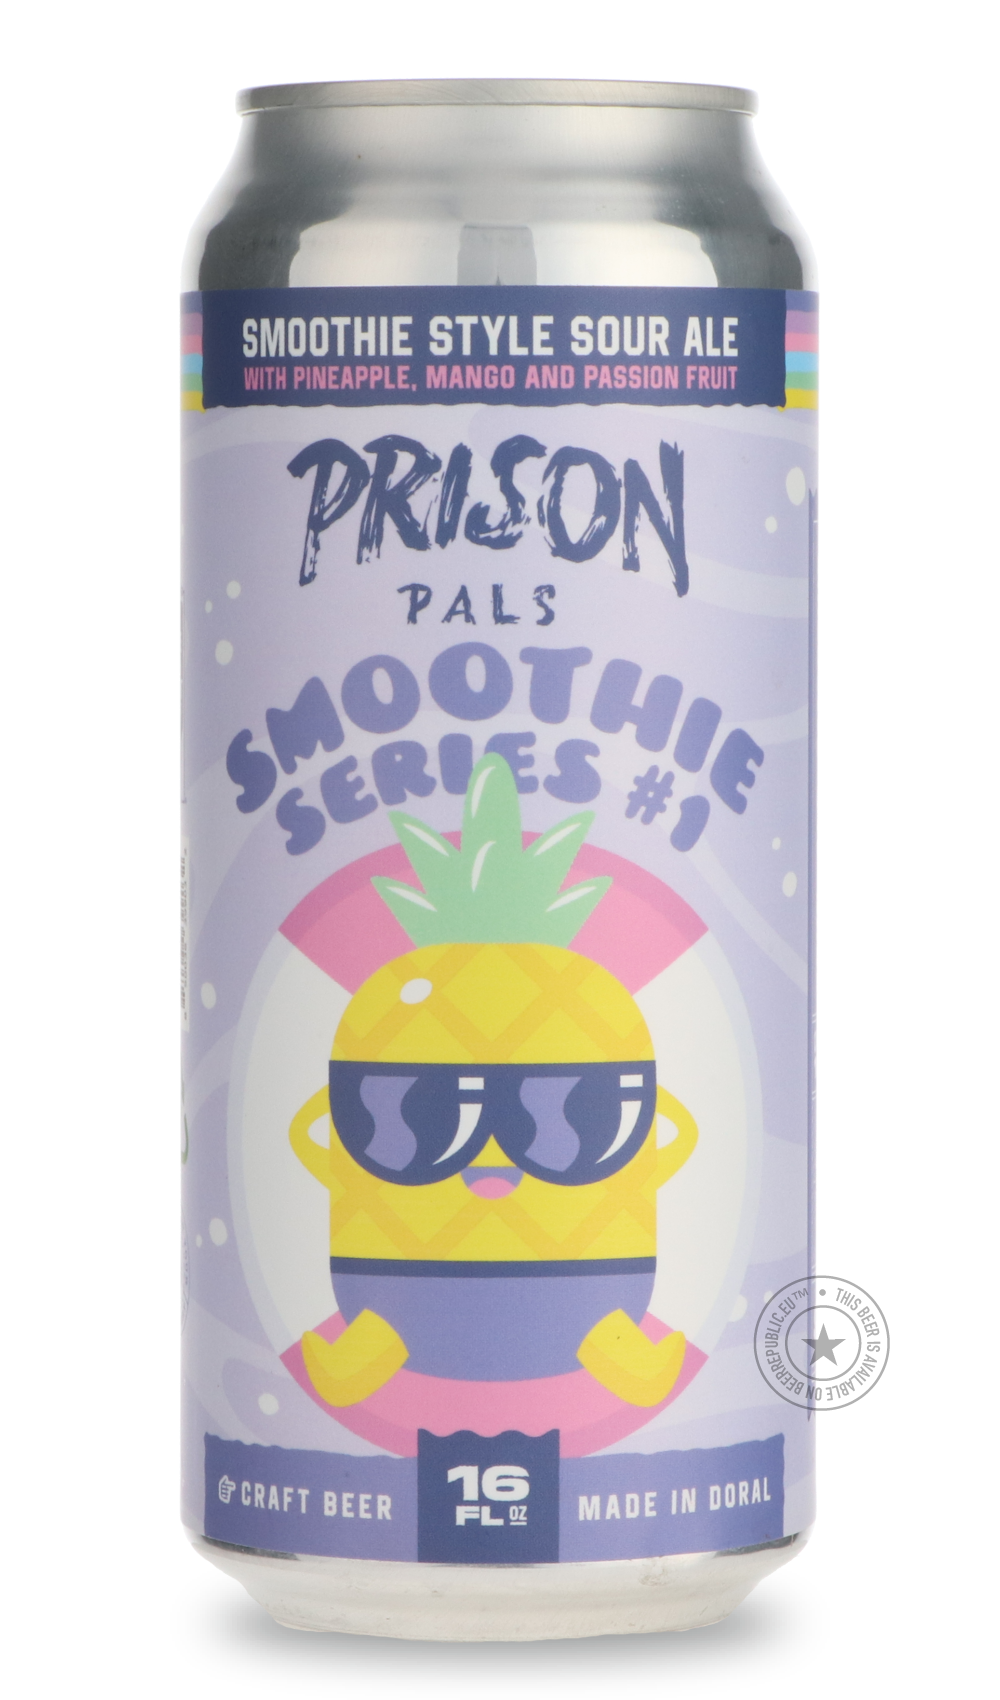 -Prison Pals- Smoothie Series #1-Sour / Wild & Fruity- Only @ Beer Republic - The best online beer store for American & Canadian craft beer - Buy beer online from the USA and Canada - Bier online kopen - Amerikaans bier kopen - Craft beer store - Craft beer kopen - Amerikanisch bier kaufen - Bier online kaufen - Acheter biere online - IPA - Stout - Porter - New England IPA - Hazy IPA - Imperial Stout - Barrel Aged - Barrel Aged Imperial Stout - Brown - Dark beer - Blond - Blonde - Pilsner - Lager - Wheat - 